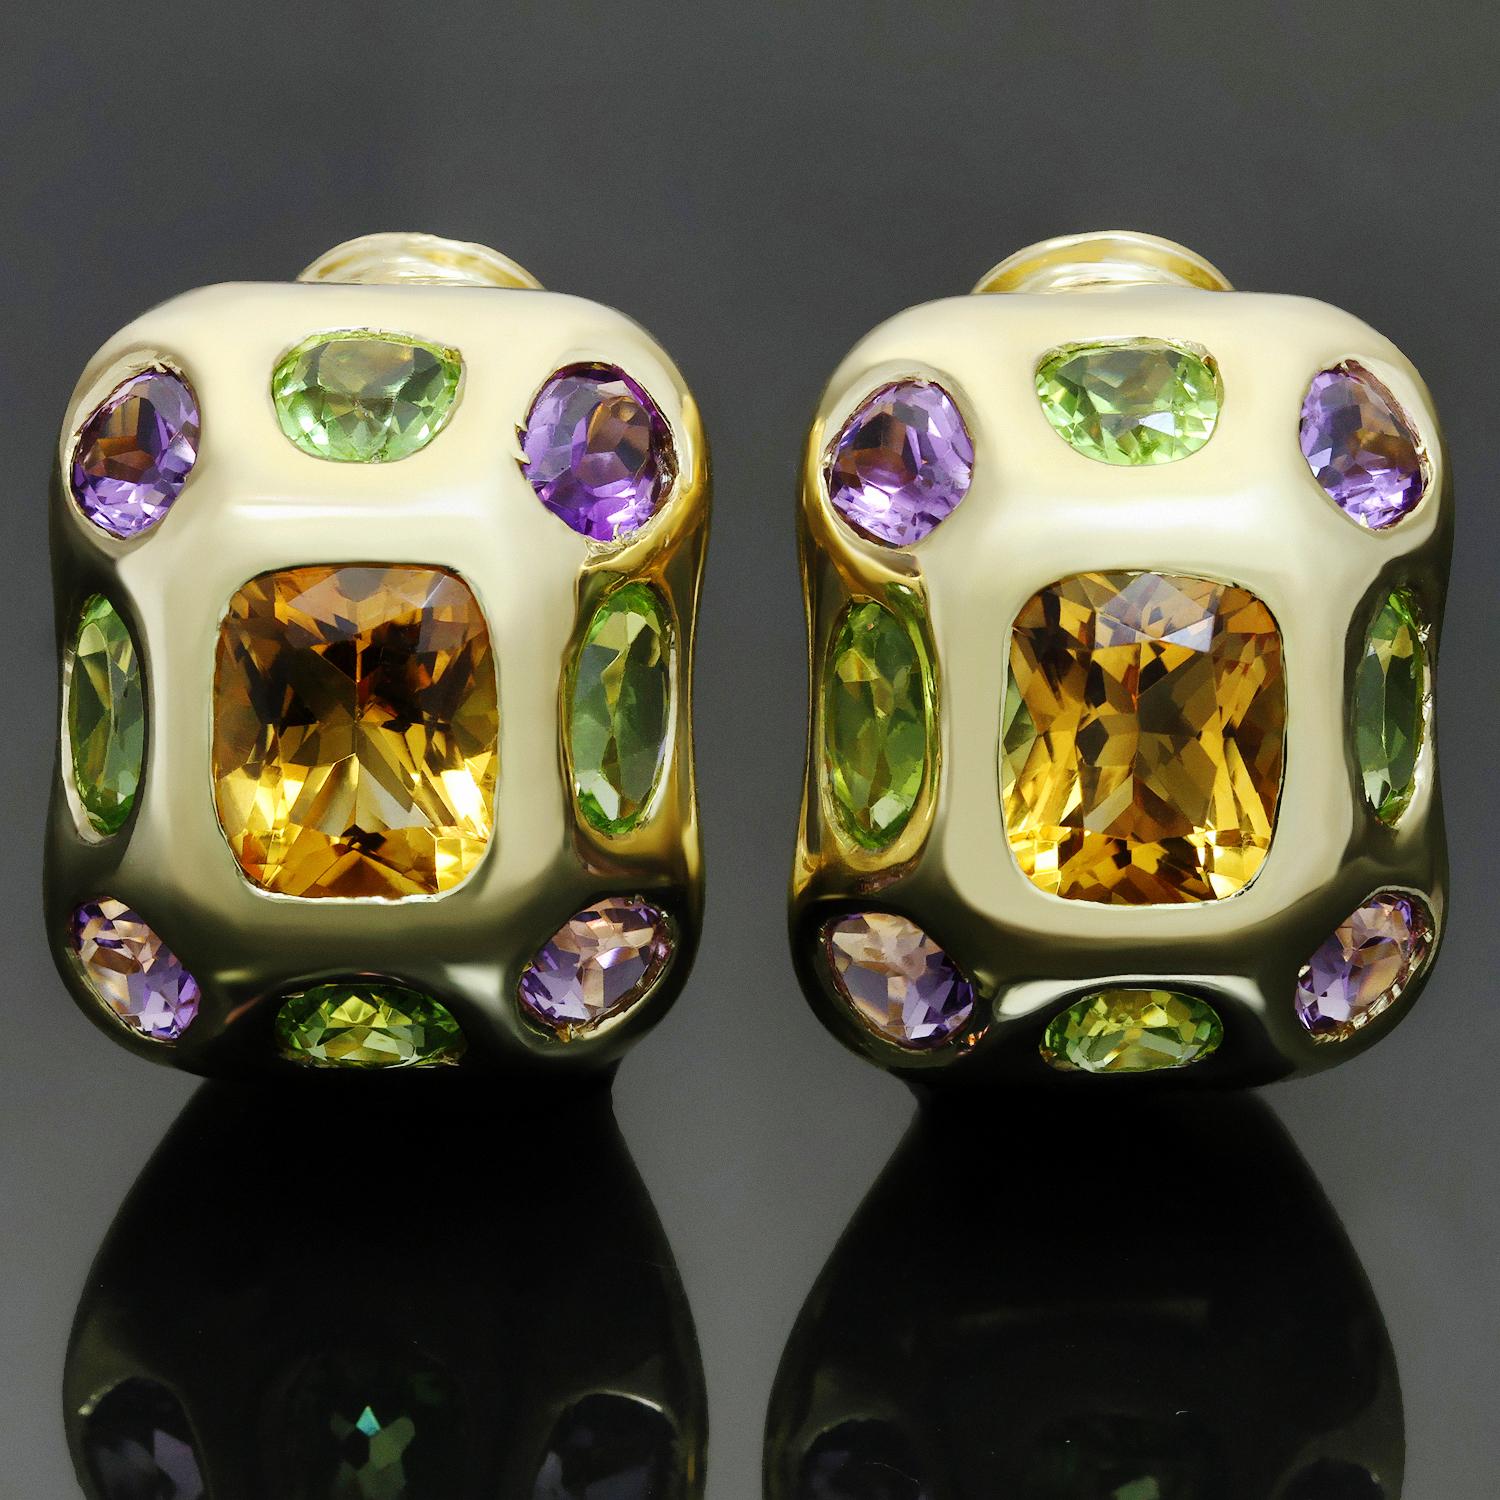 These chic Chanel dome-shaped lever-back earrings from the vibrant Baroque collection are crafted in 18k yellow gold and feature faceted citrines in the center surrounded by 4 amethysts and 4 peridots. Made in France circa 2010s. Measurements: 0.70